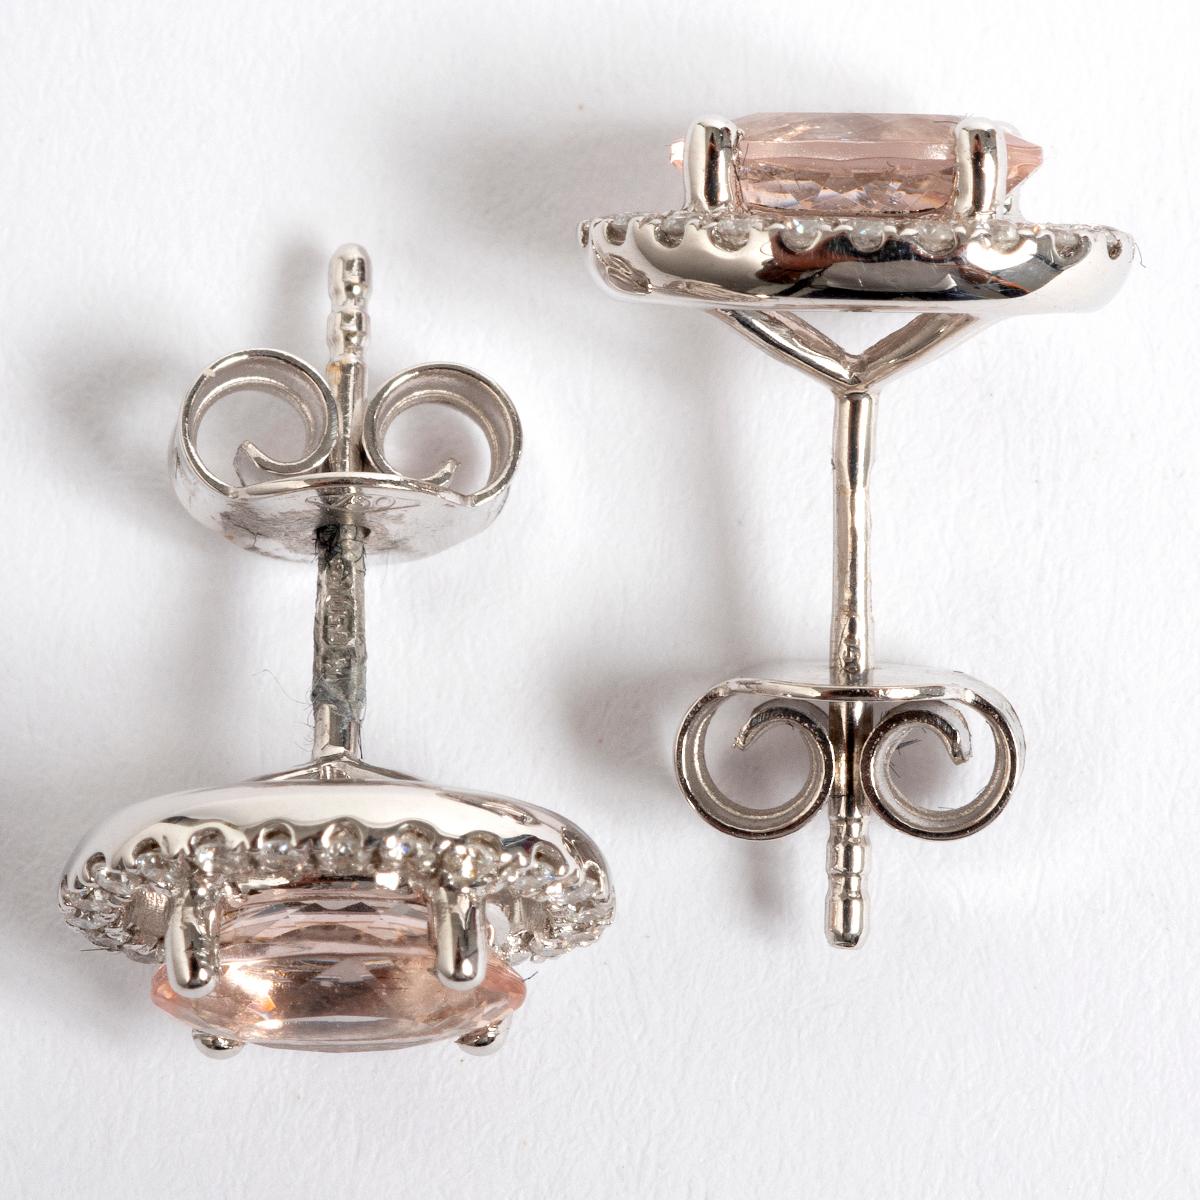 Mixed Cut Diamond & Morganite Earrings, Set in 18 Carat White Gold. For Sale